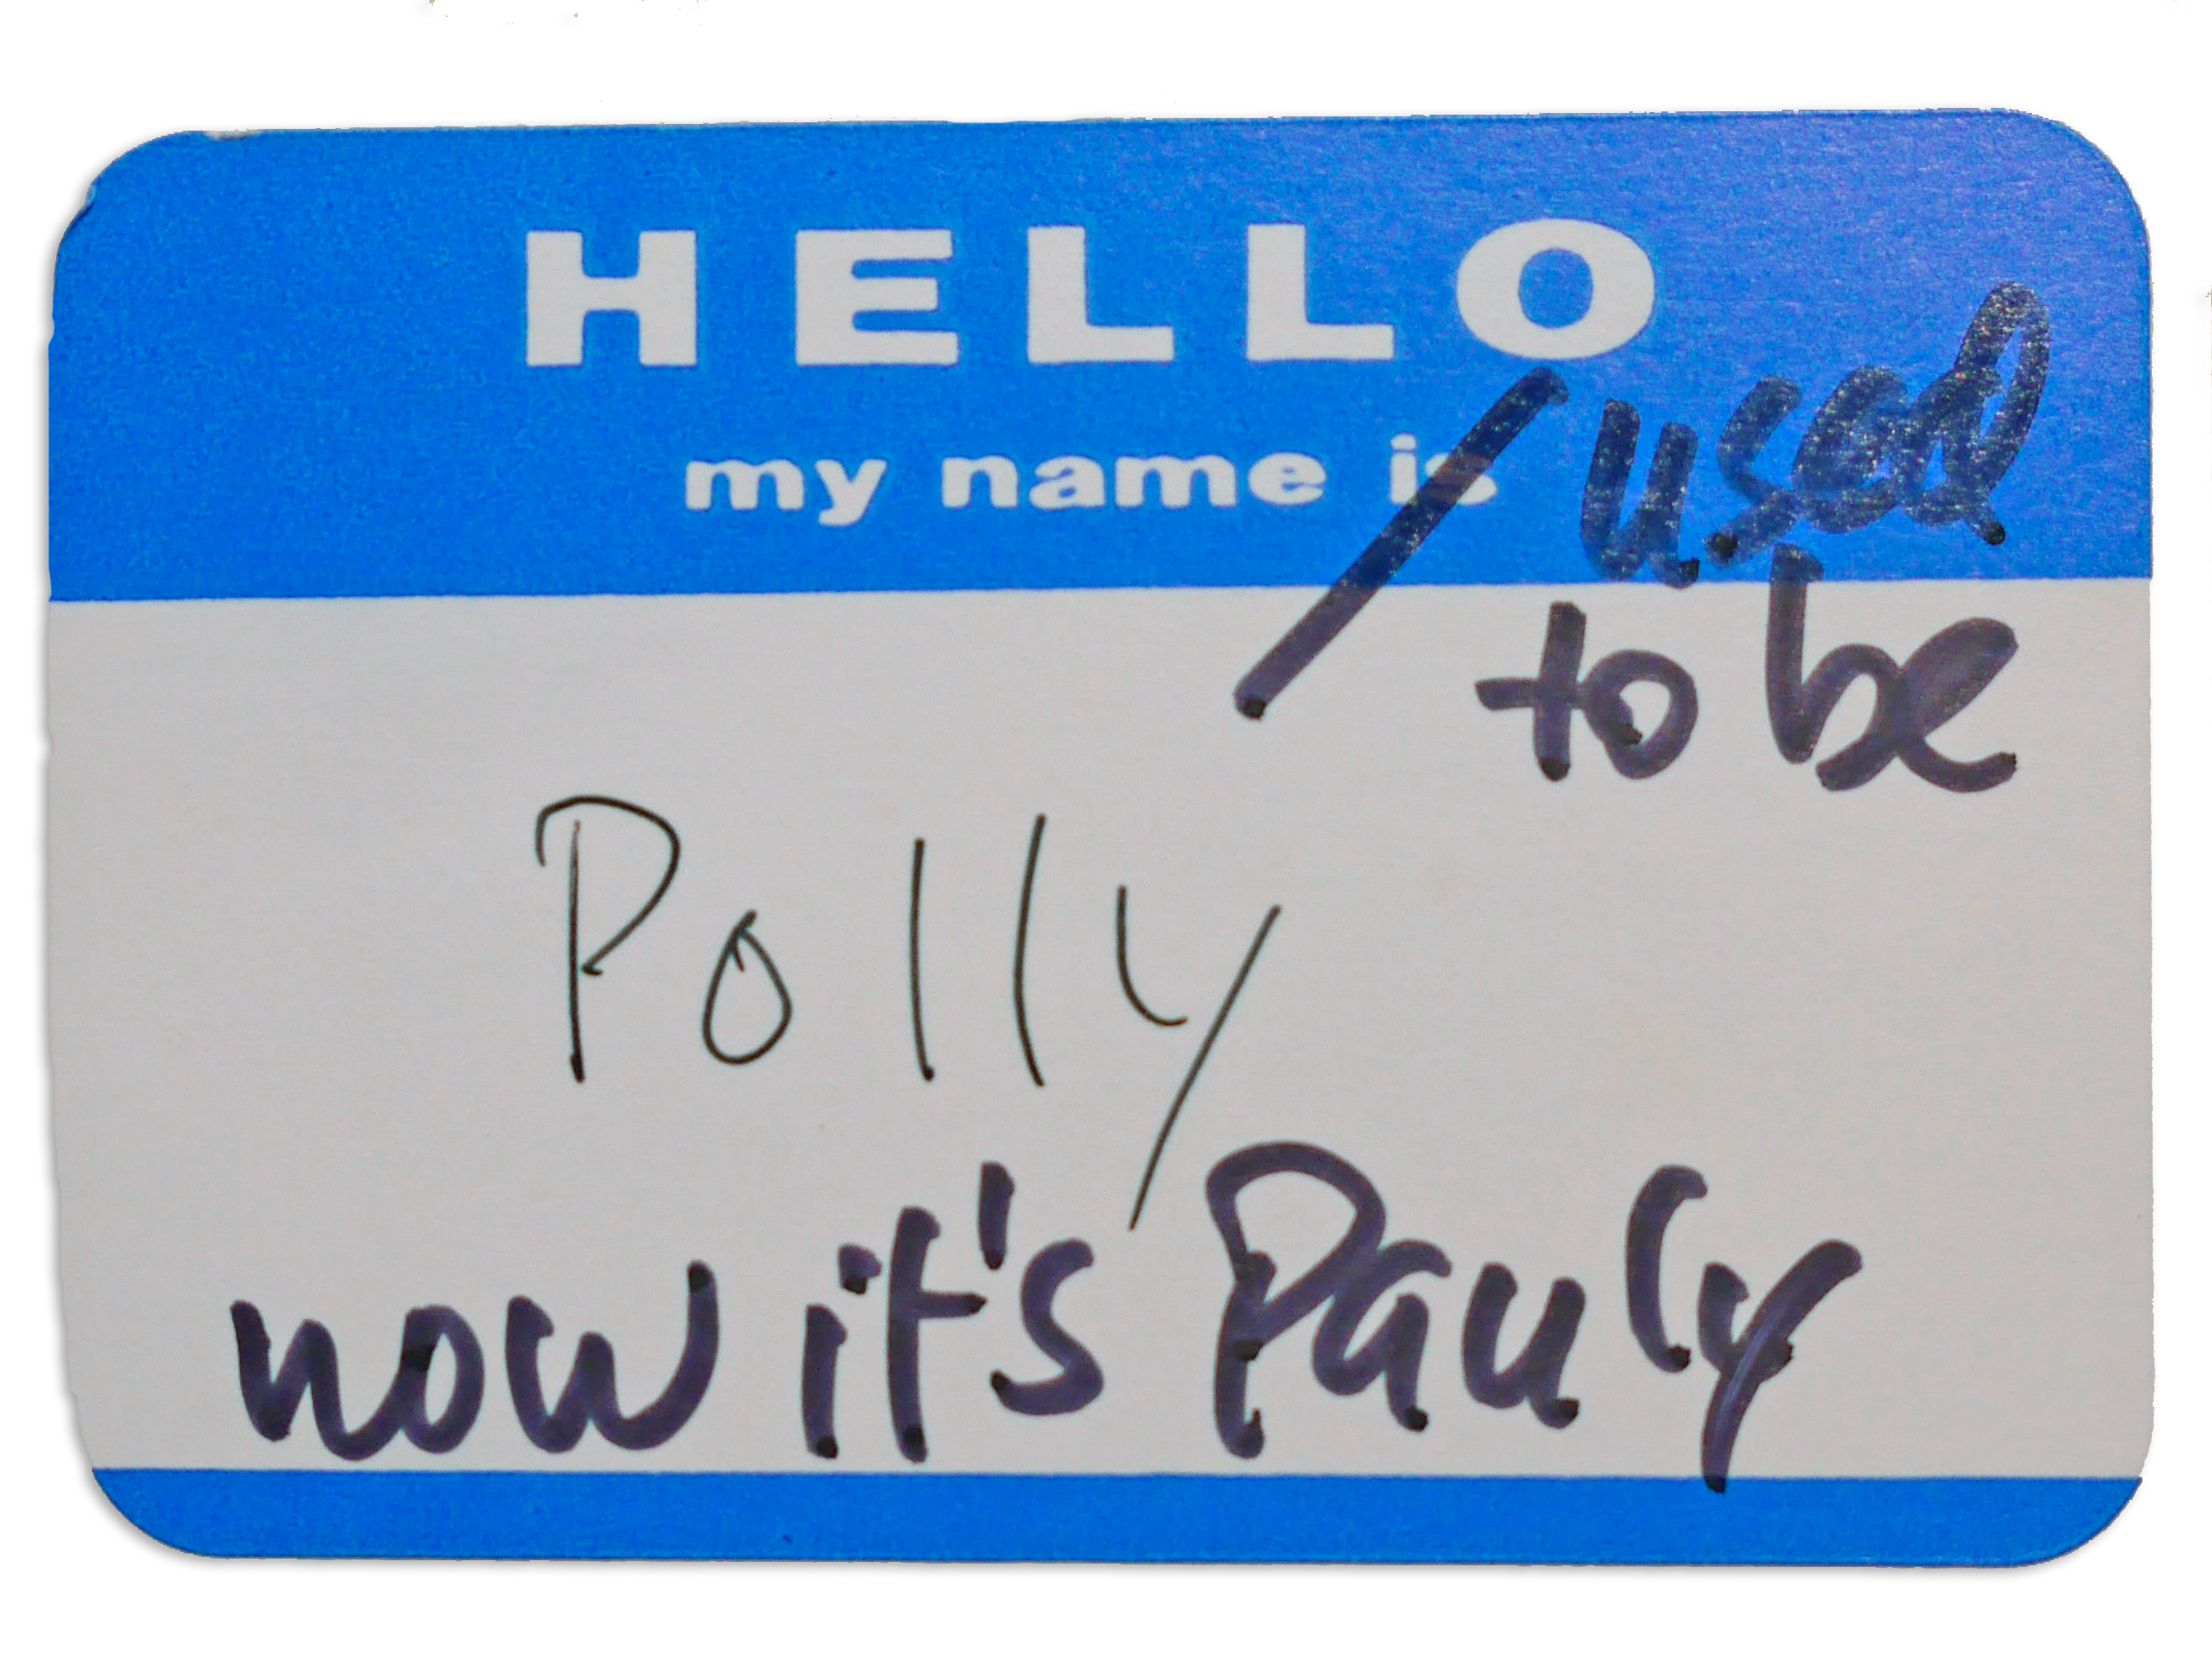 hello my name is sticker: old name, Polly; new name, Pauly